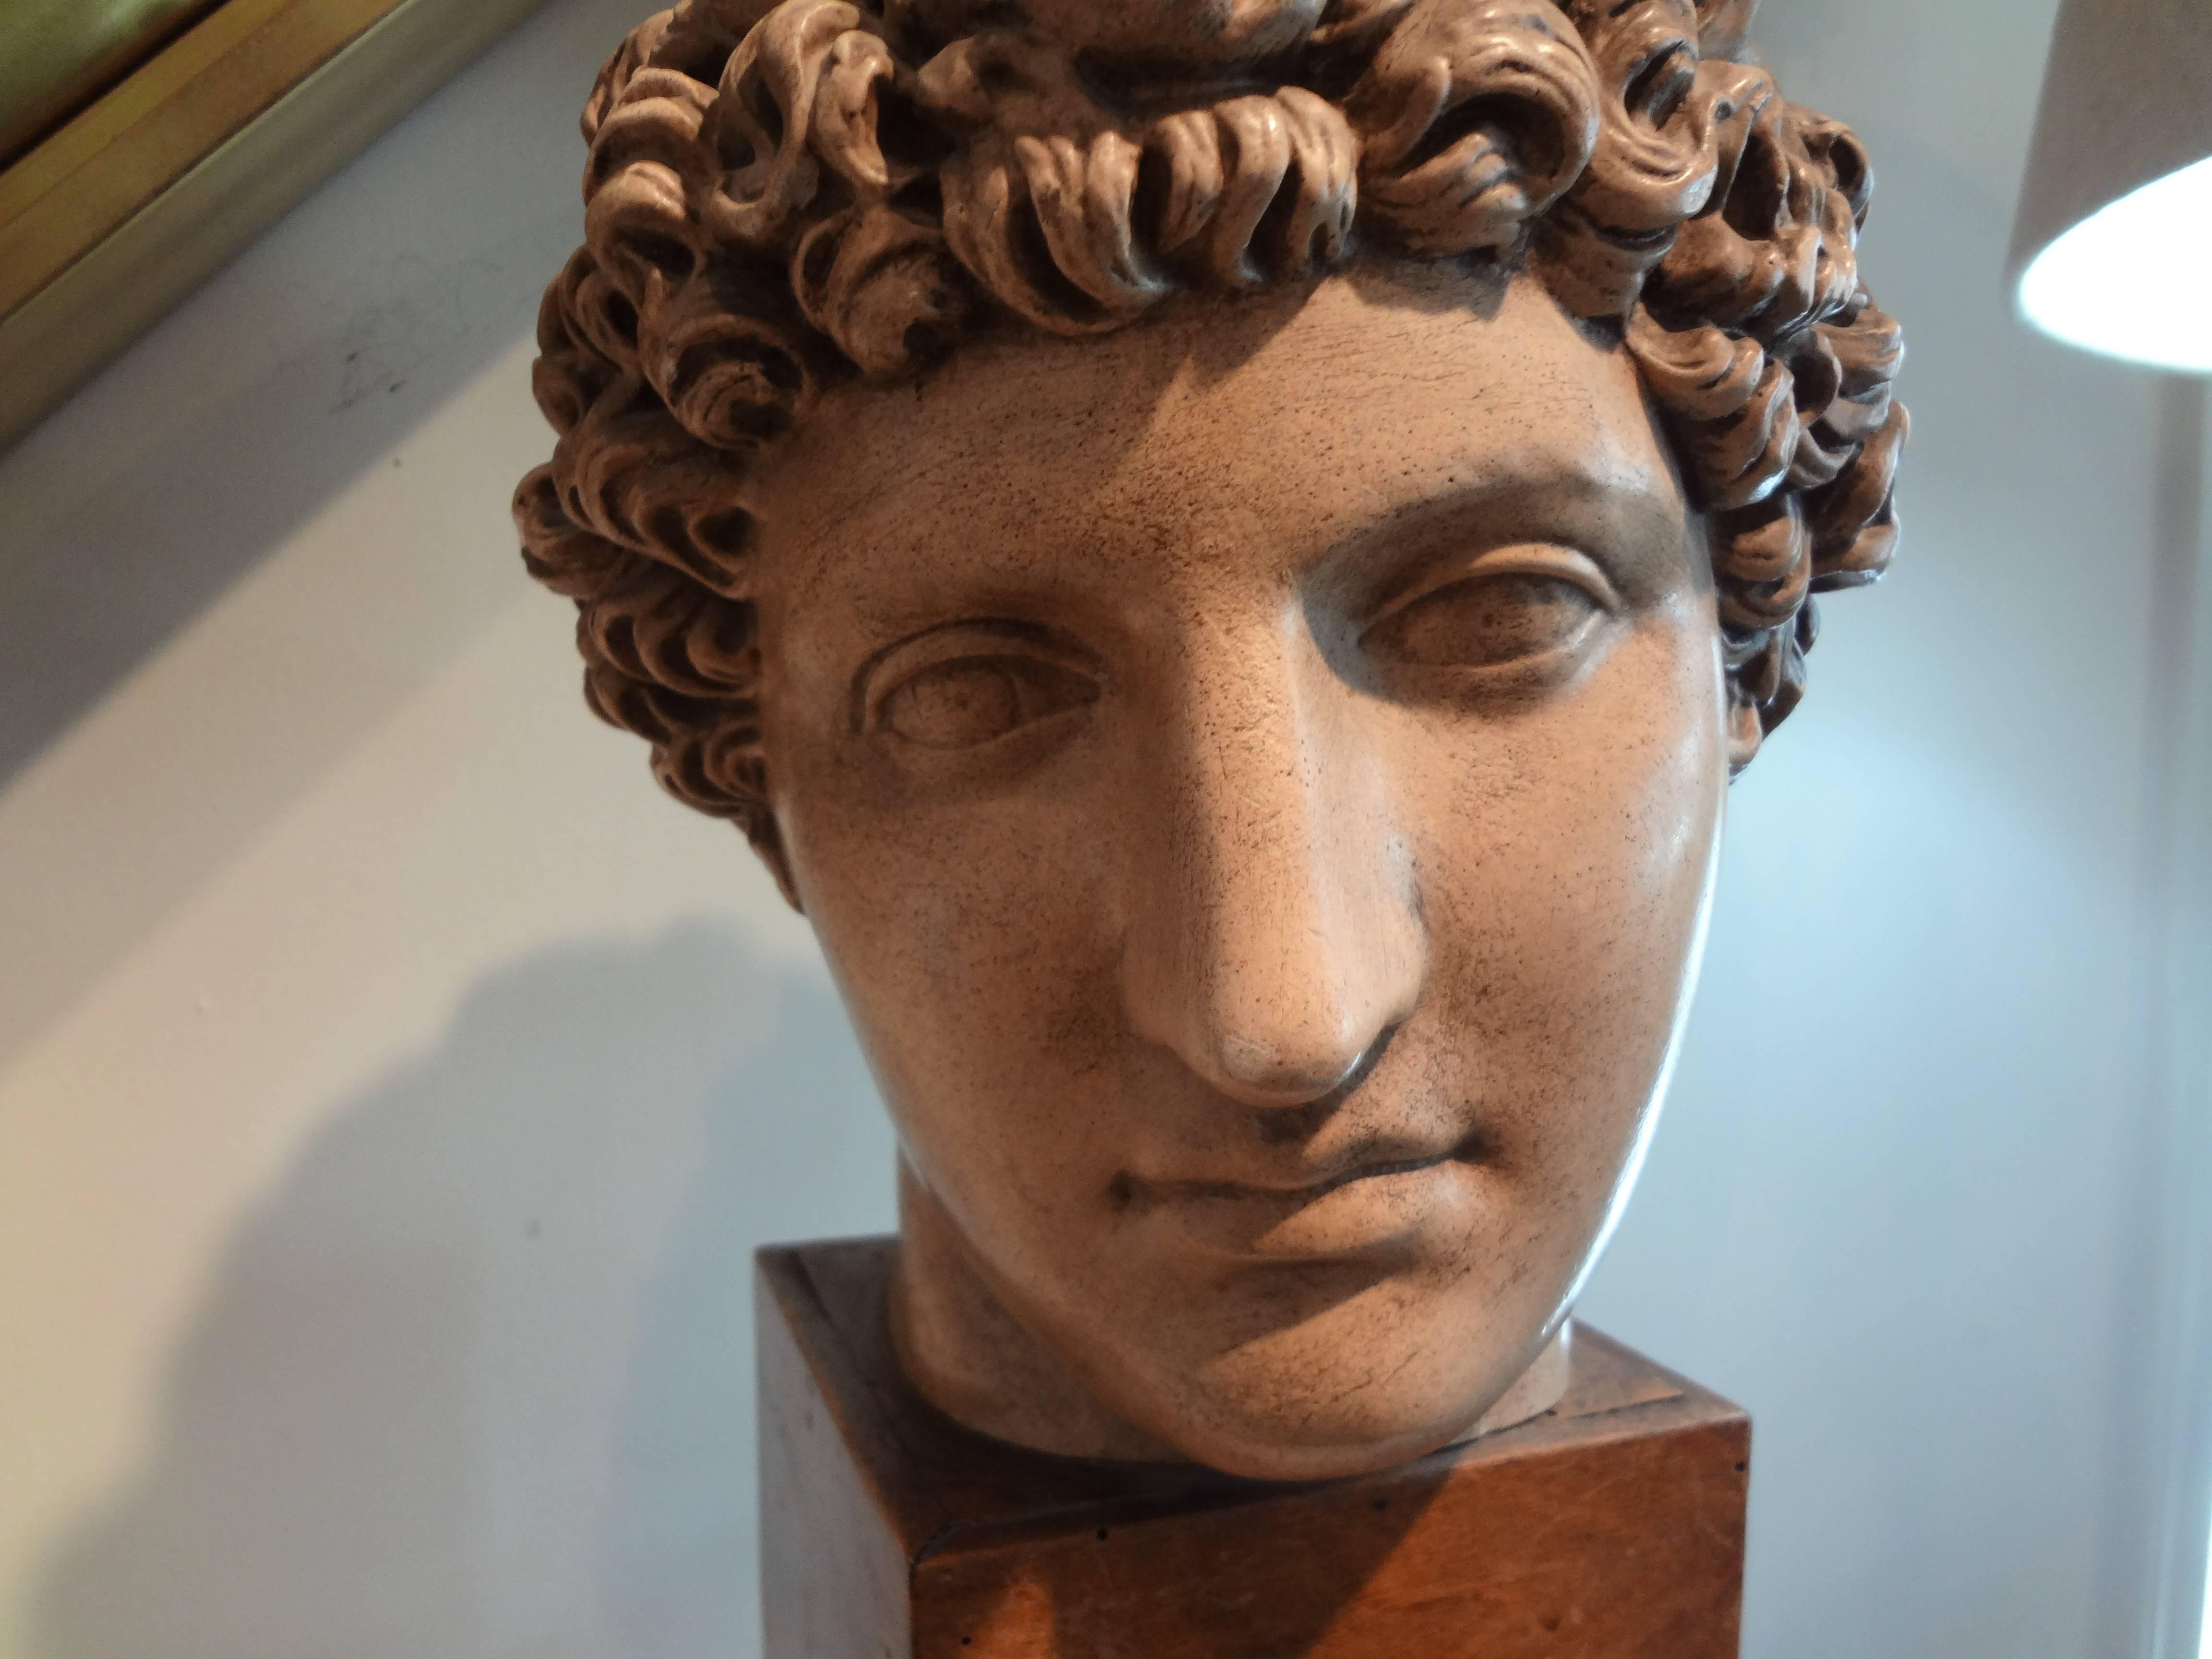 Italian Patinated Terra Cotta Bust or Sculpture of a Classical Roman on a Wood Base, Circa 1920, Possibly A Grand Tour Piece.  Well Executed and Detailed.